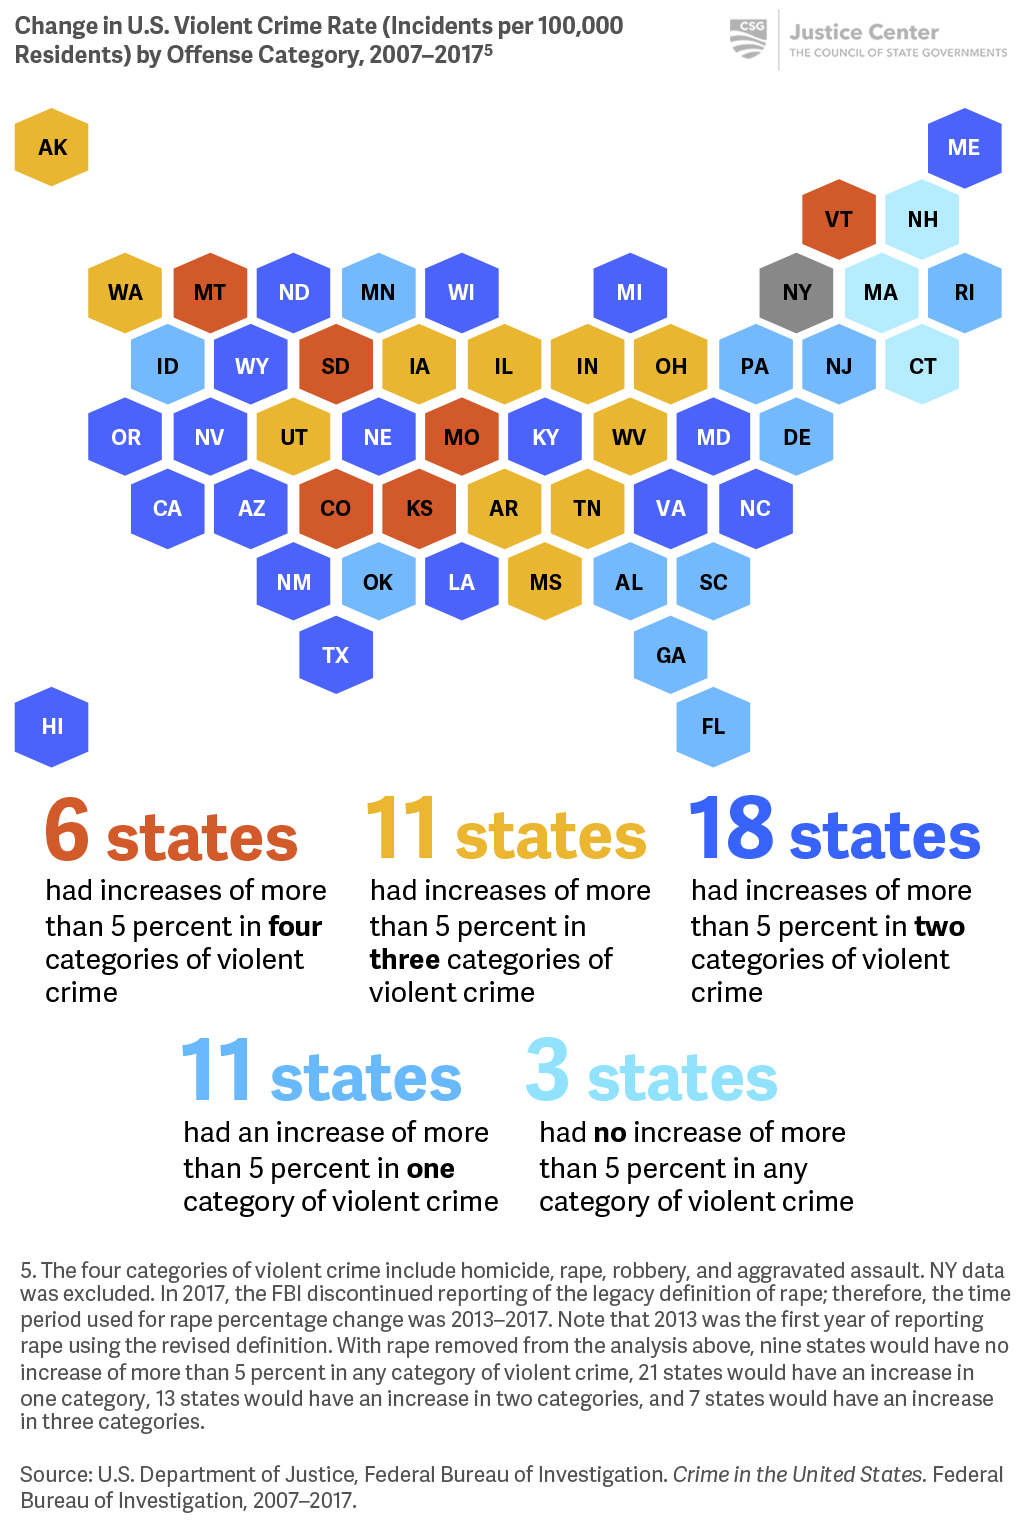 While only 19 states had increases in the rate of violent crime during the last decade, 46 states had increases of more than 5 percent in at least one of the four categories of violent crime.